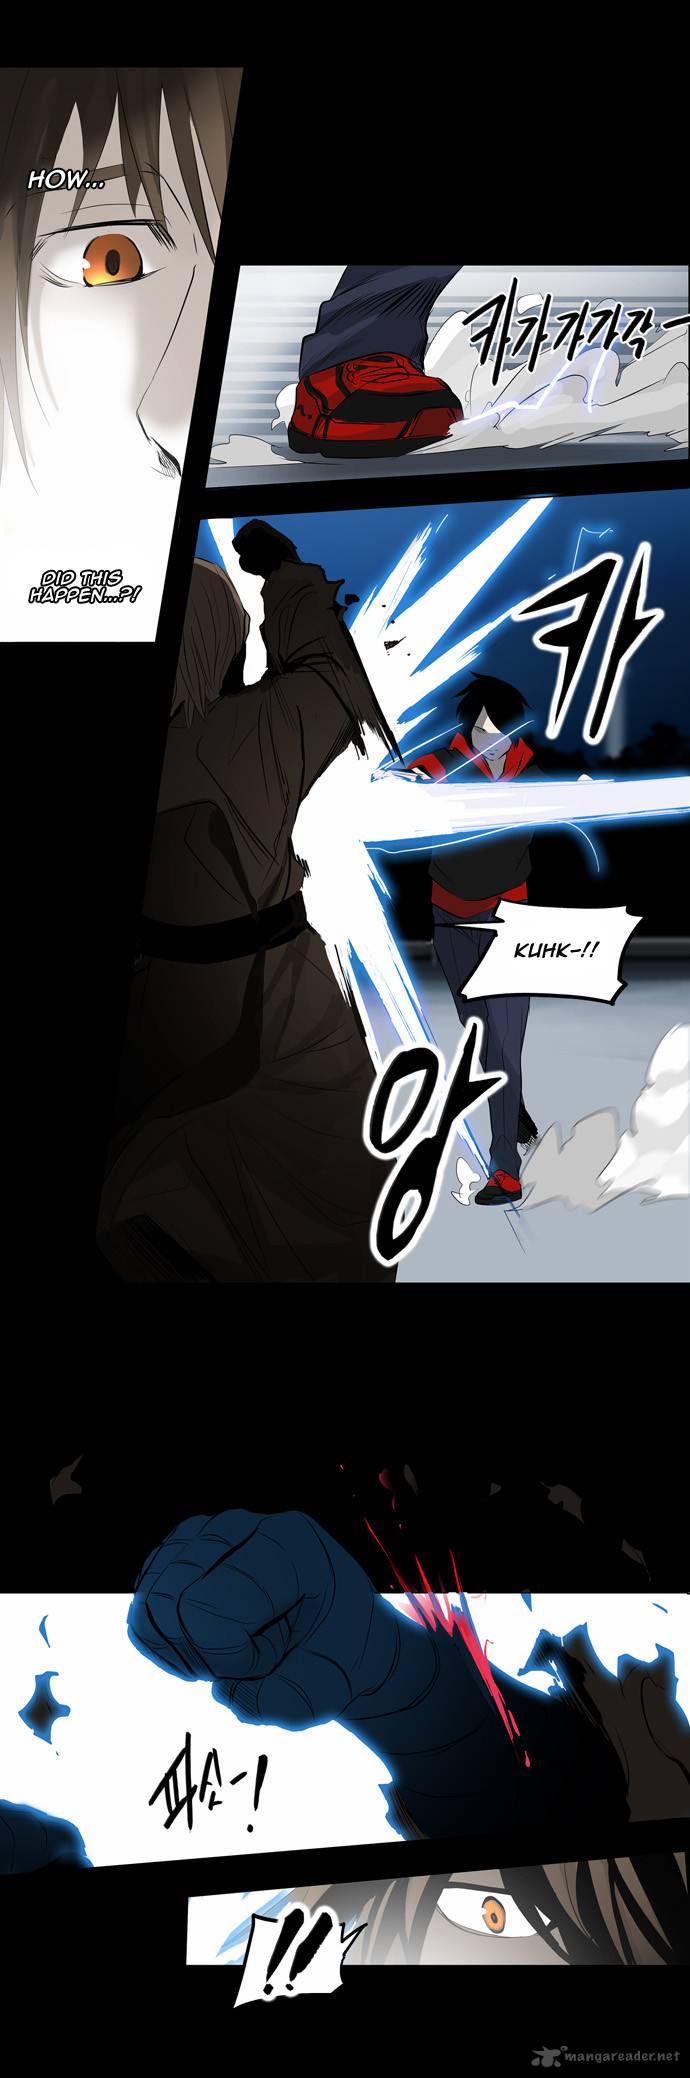 Tower Of God 141 17